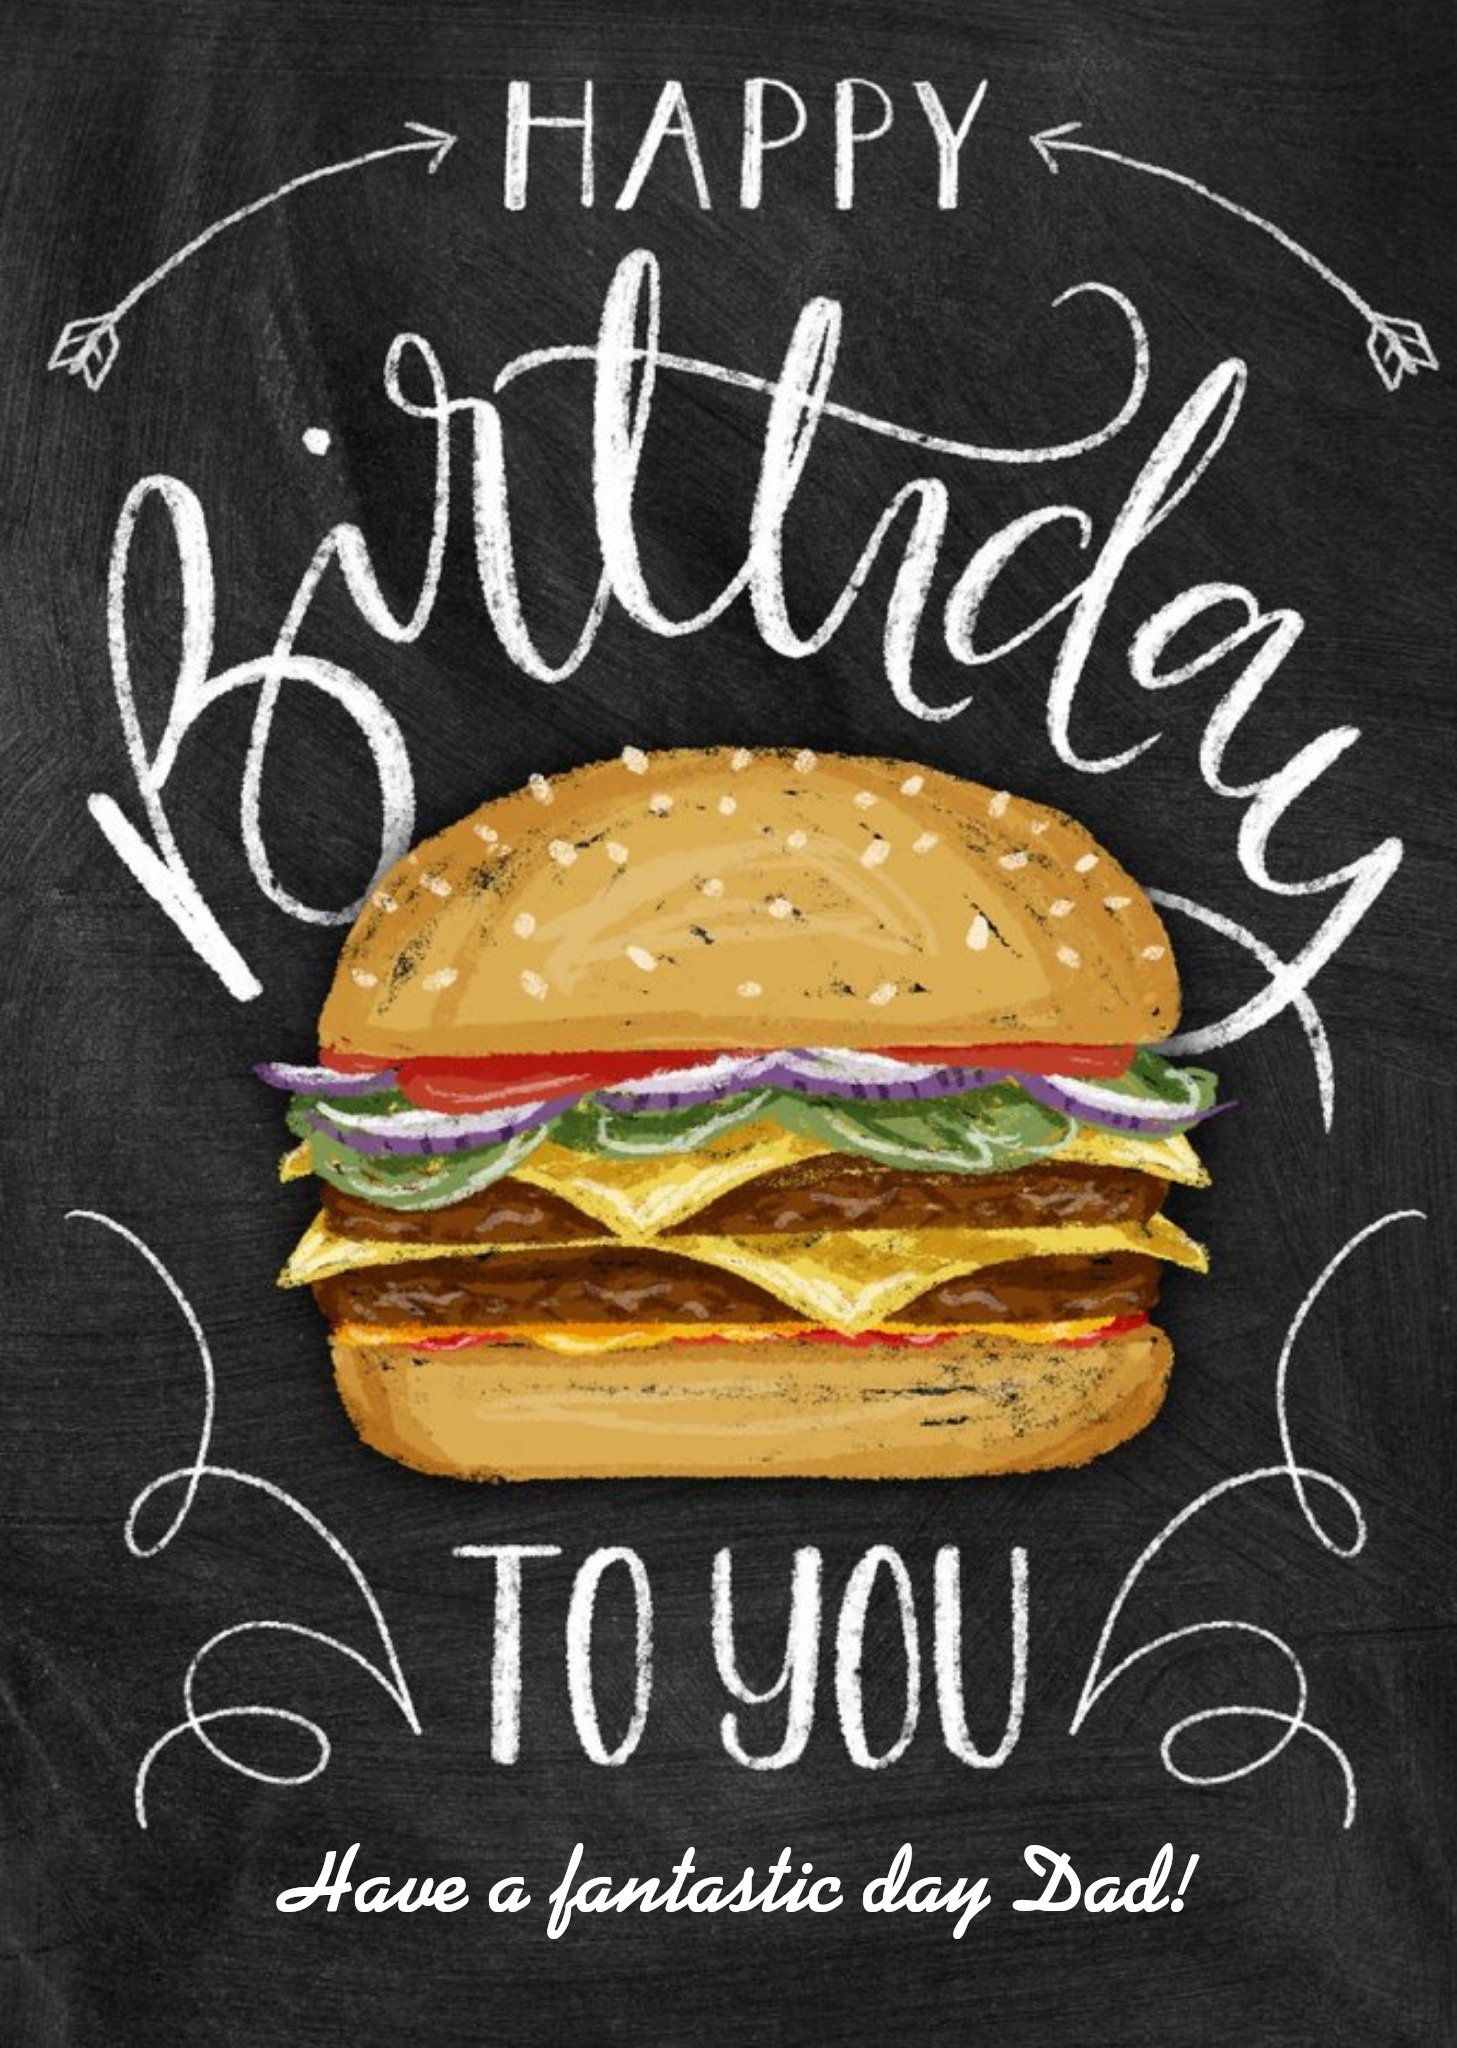 Moonpig Illustrated Burger Happy Birthday To You Personalised Card Ecard